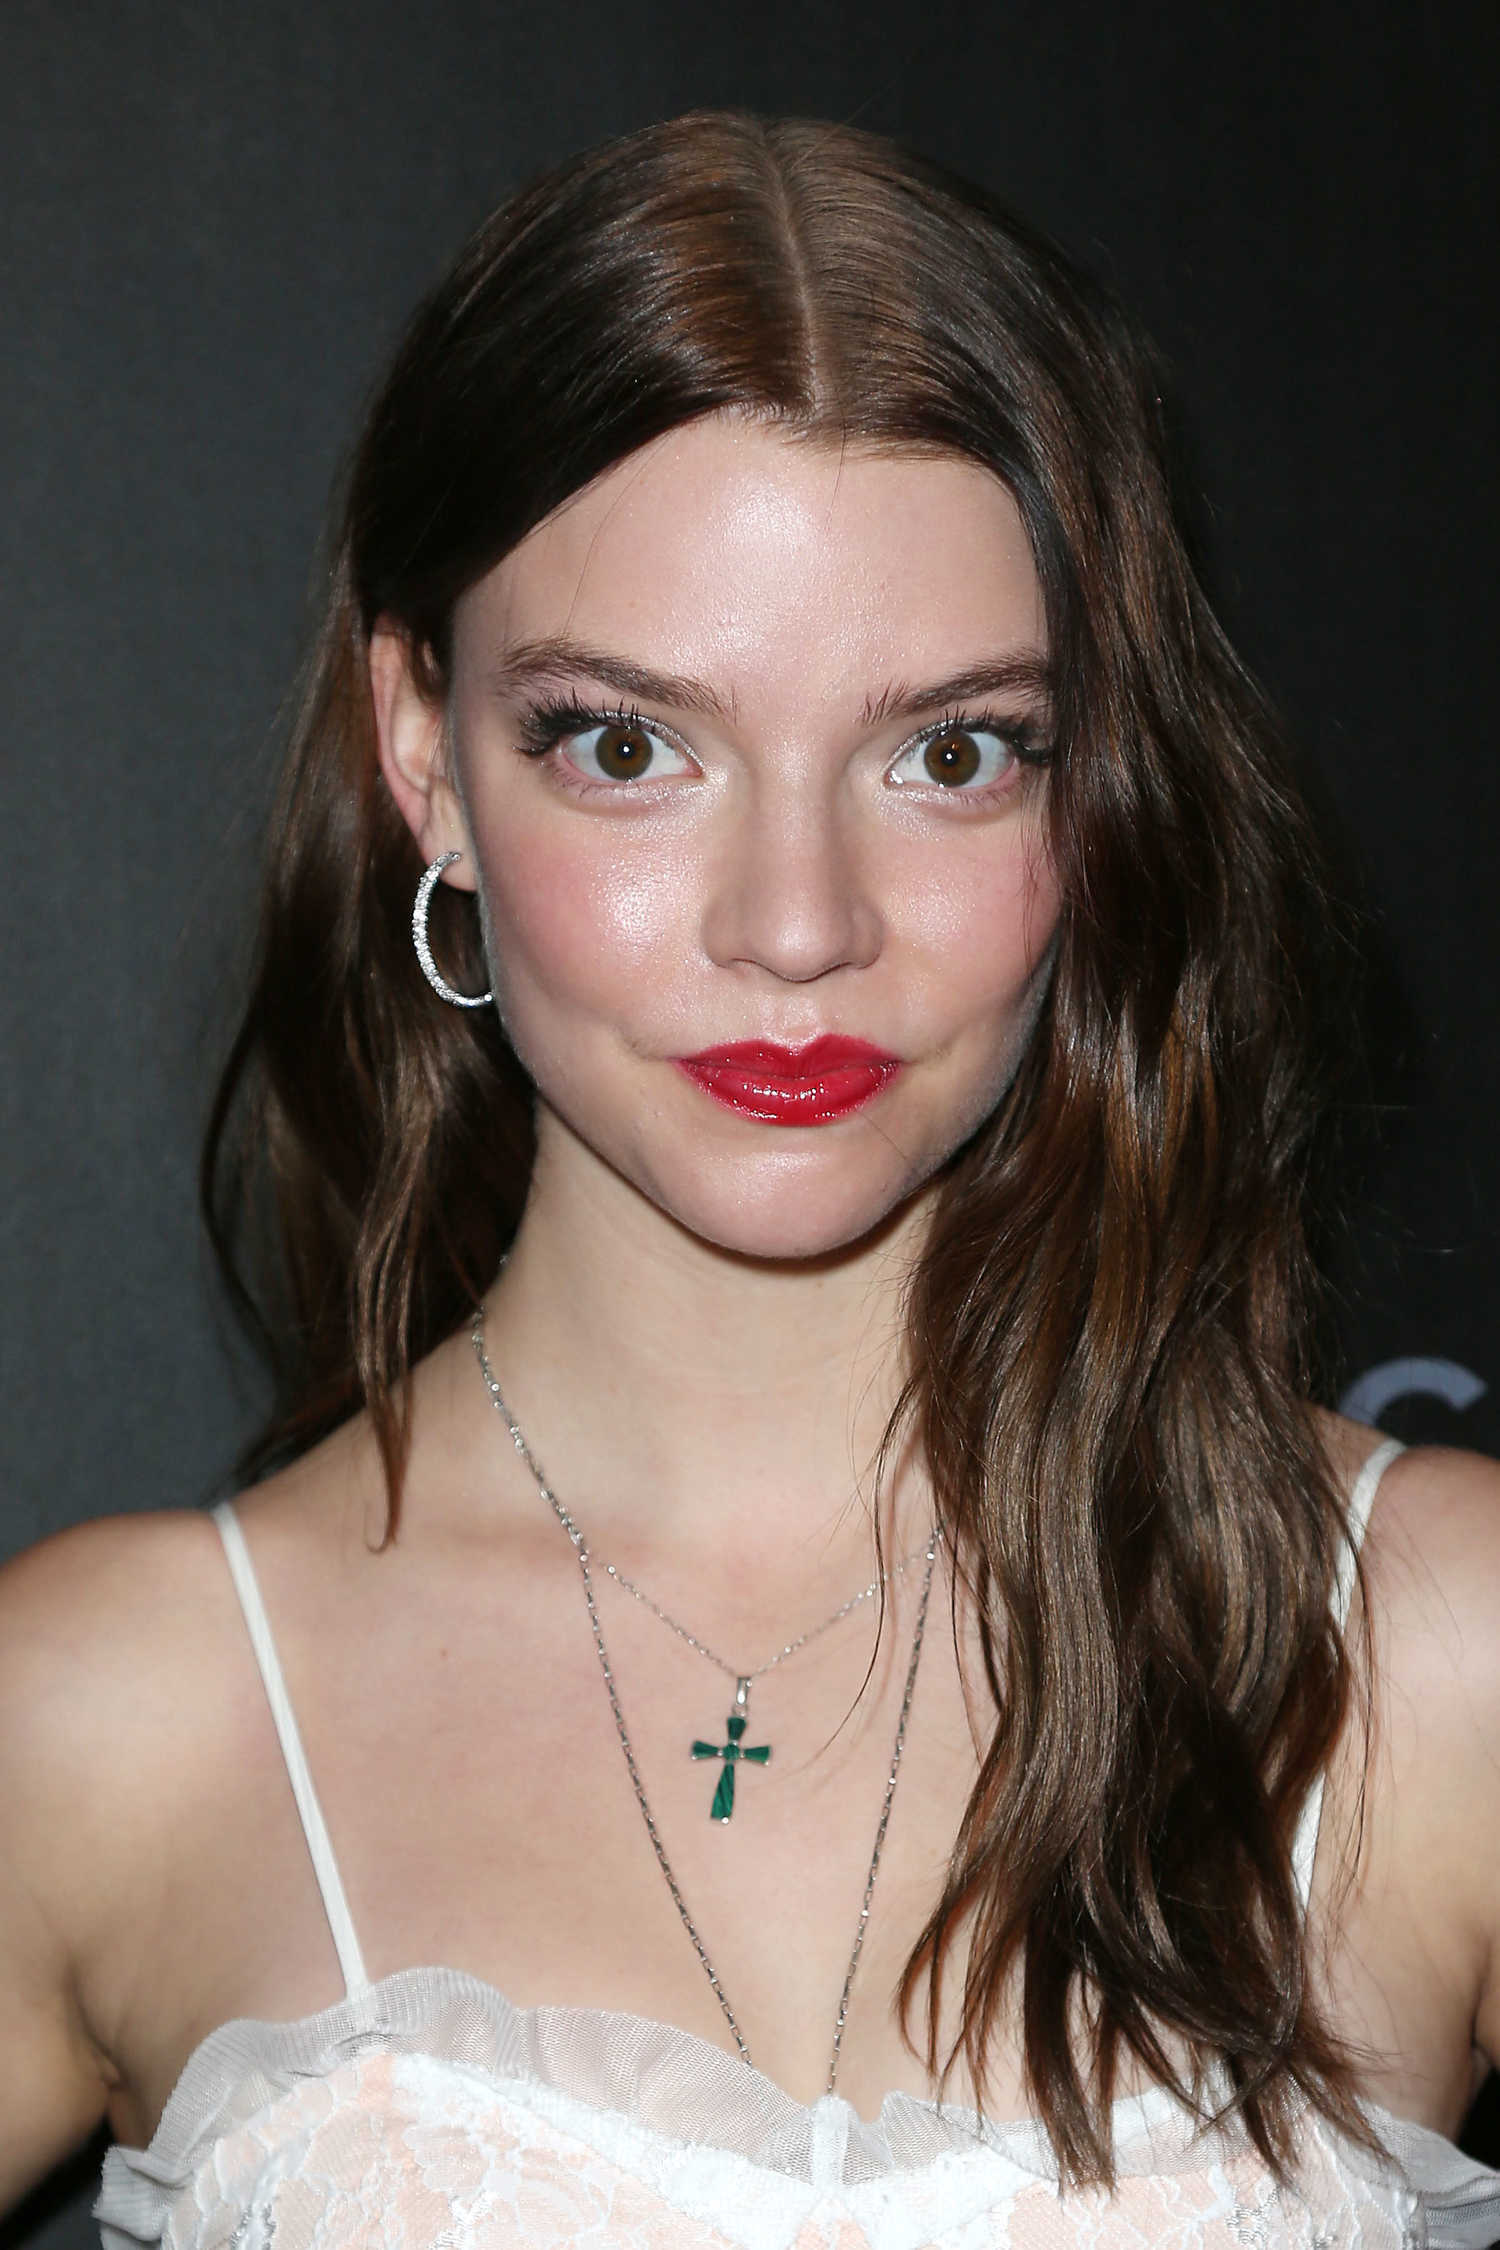 Anya TaylorJoy at the Special Screening of Thoroughbreds in New York